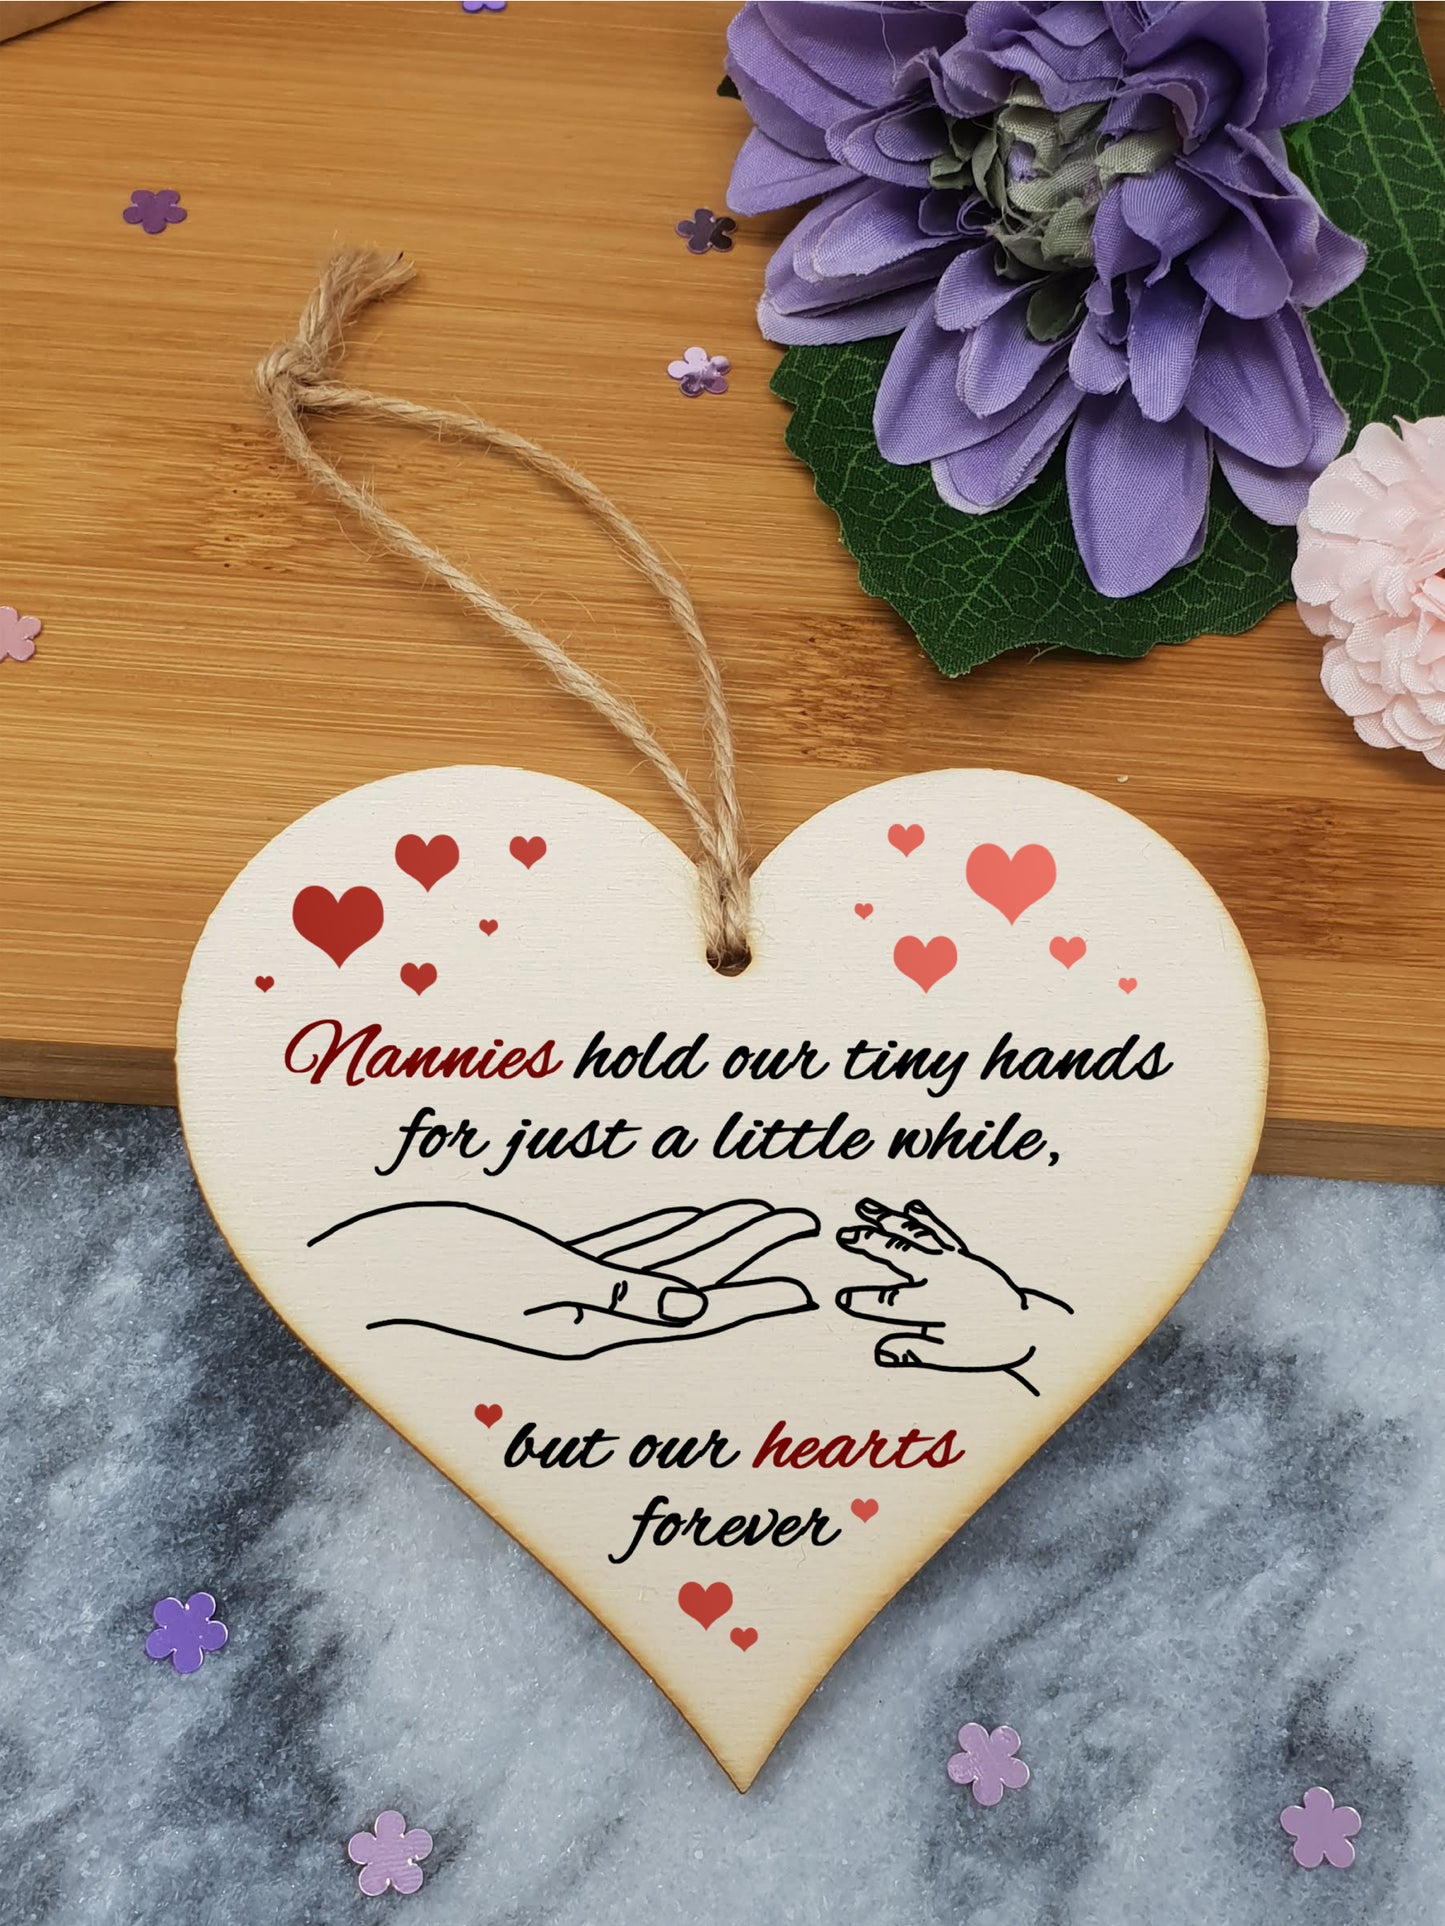 Handmade Wooden Hanging Heart Plaque Gift for Nannies from Kids Babies Thoughtful Keepsake